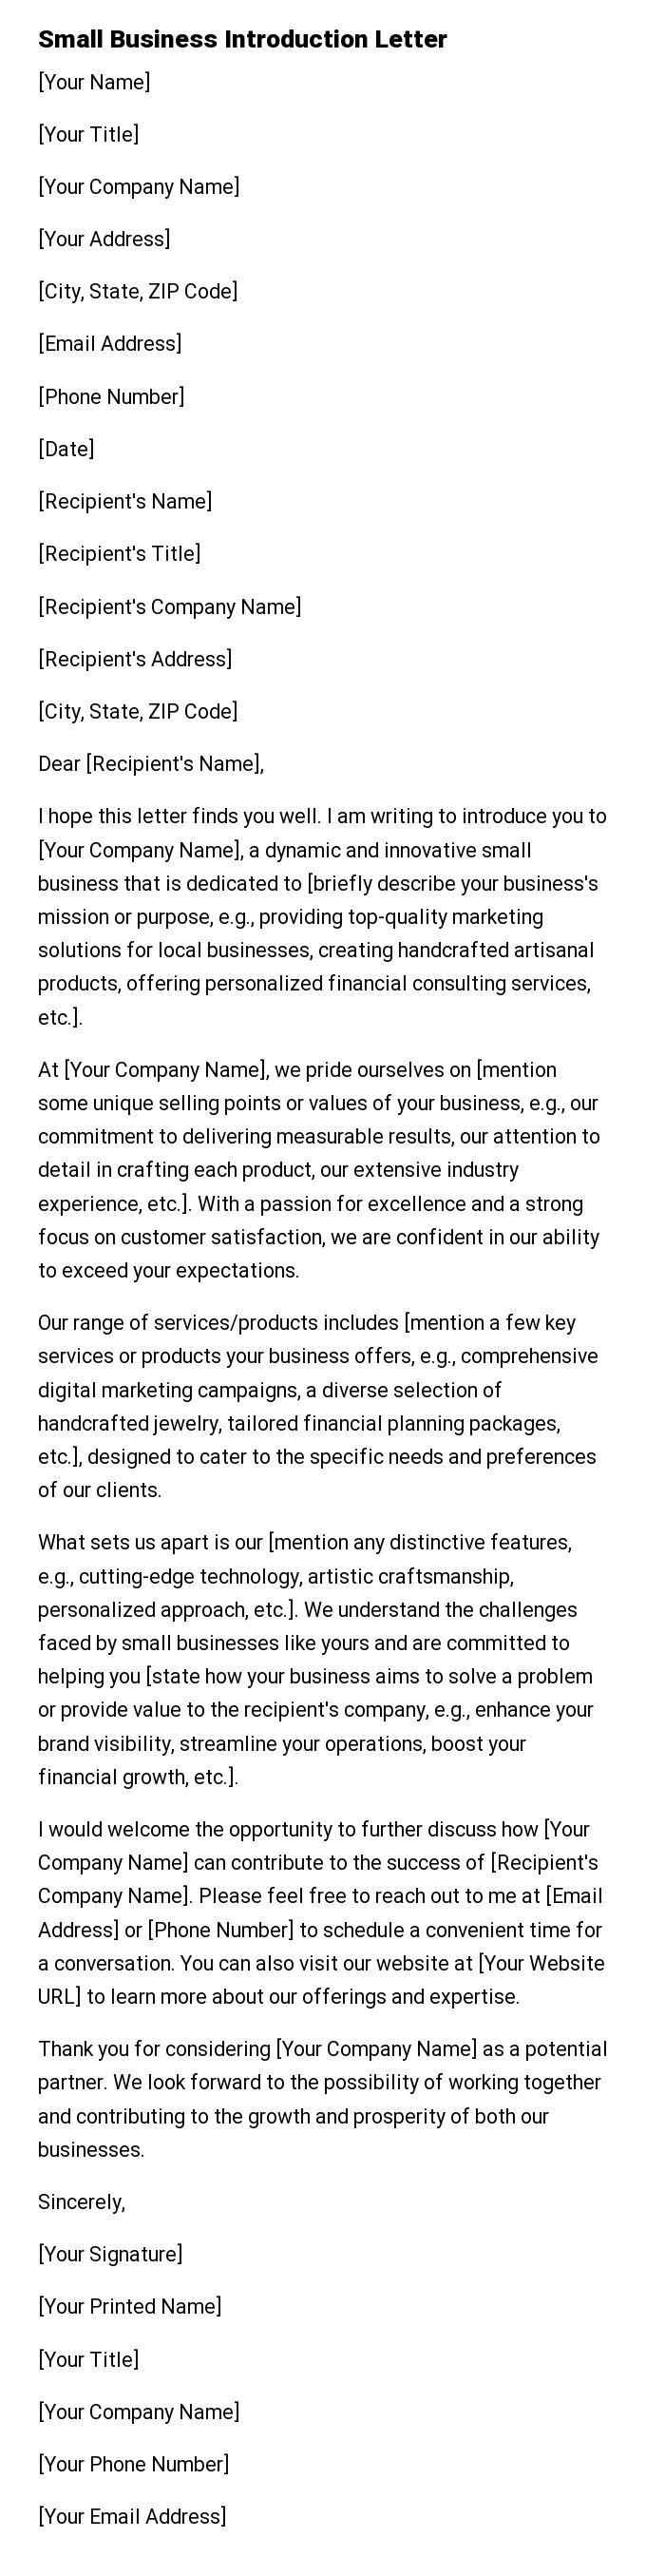 Small Business Introduction Letter